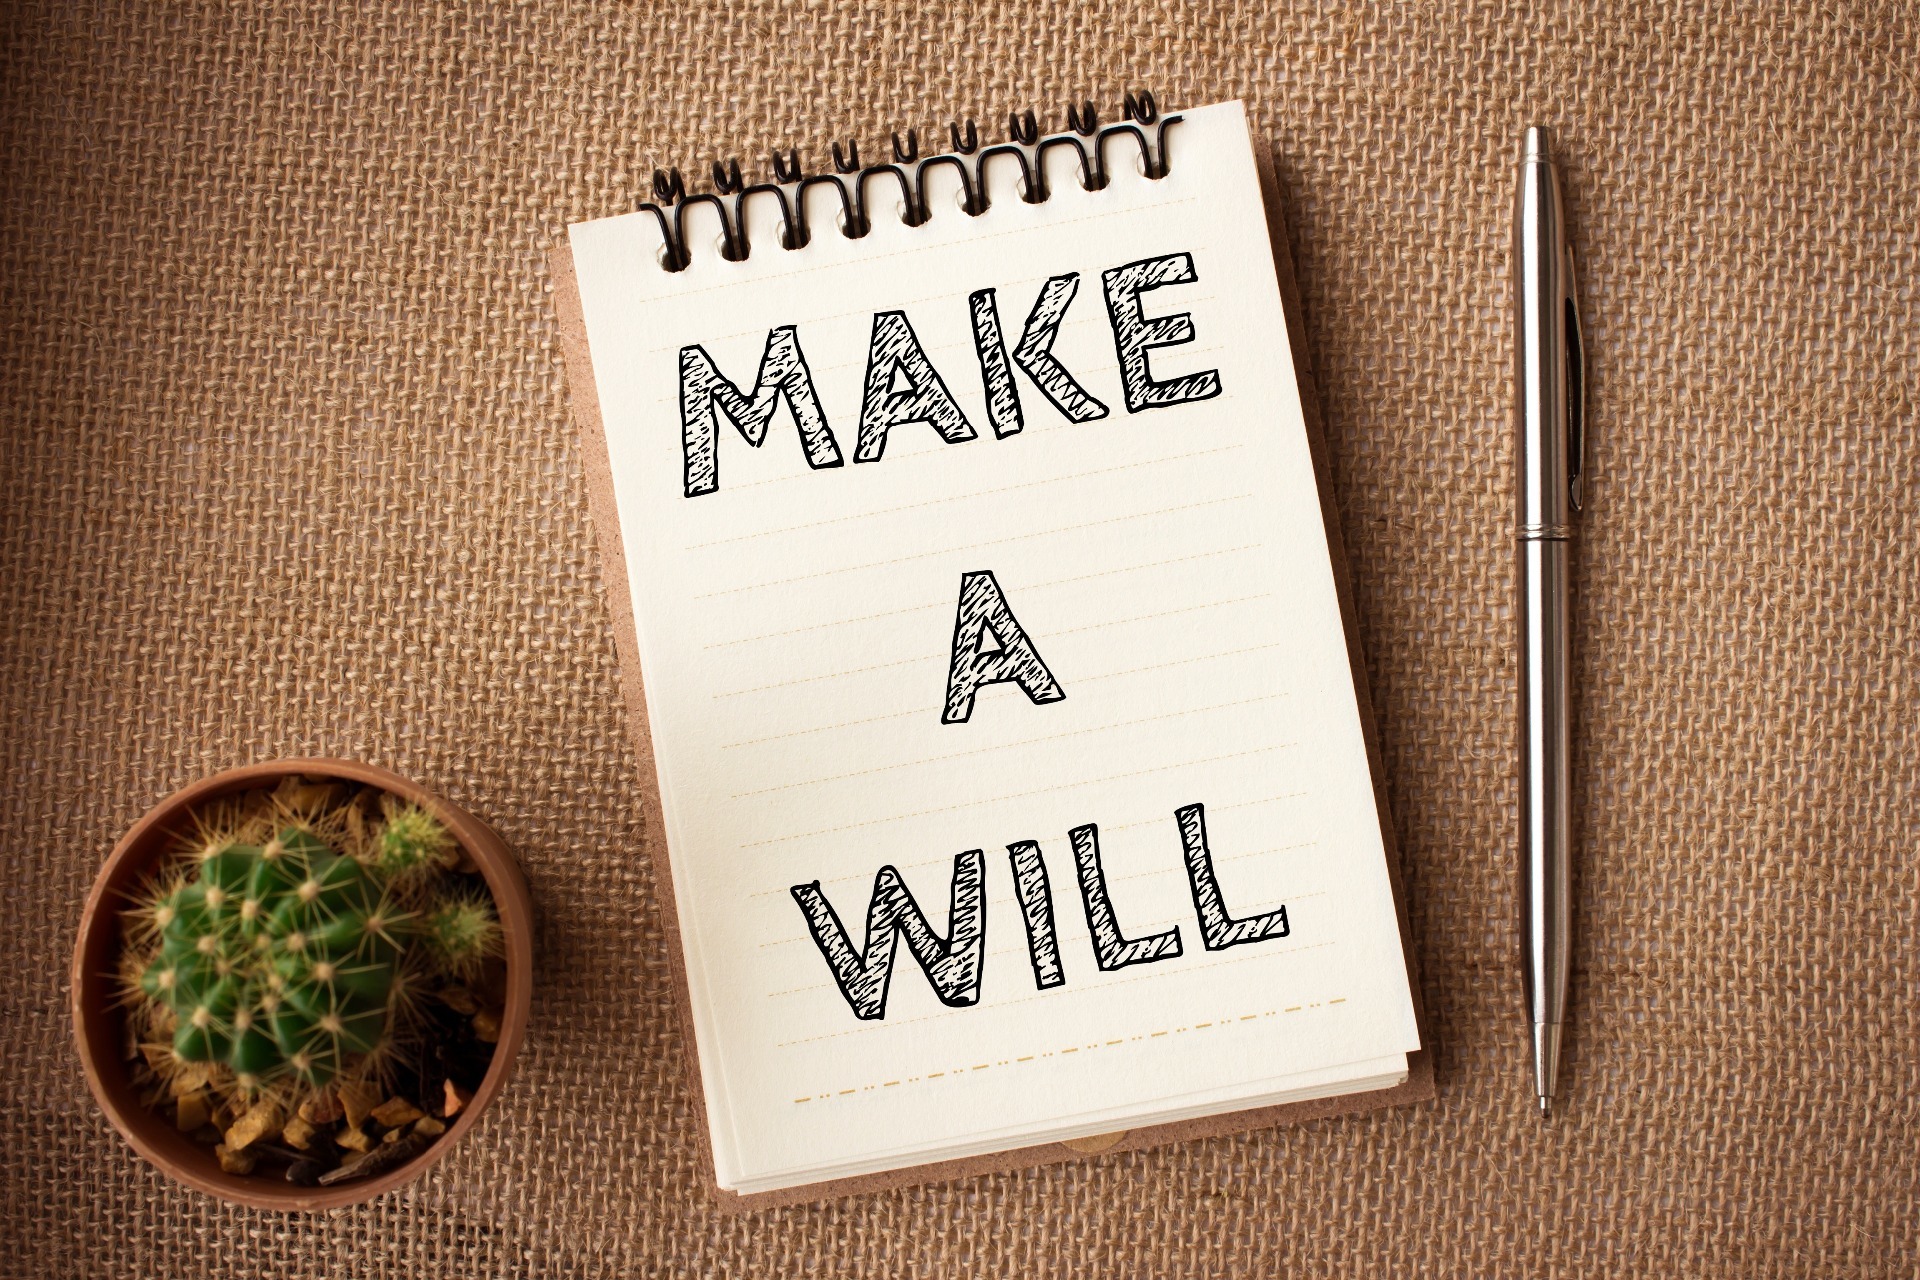 A notebook which says "Make a Will" - our Wills Solicitors in Lytham can assist.  Call 01253 202452.